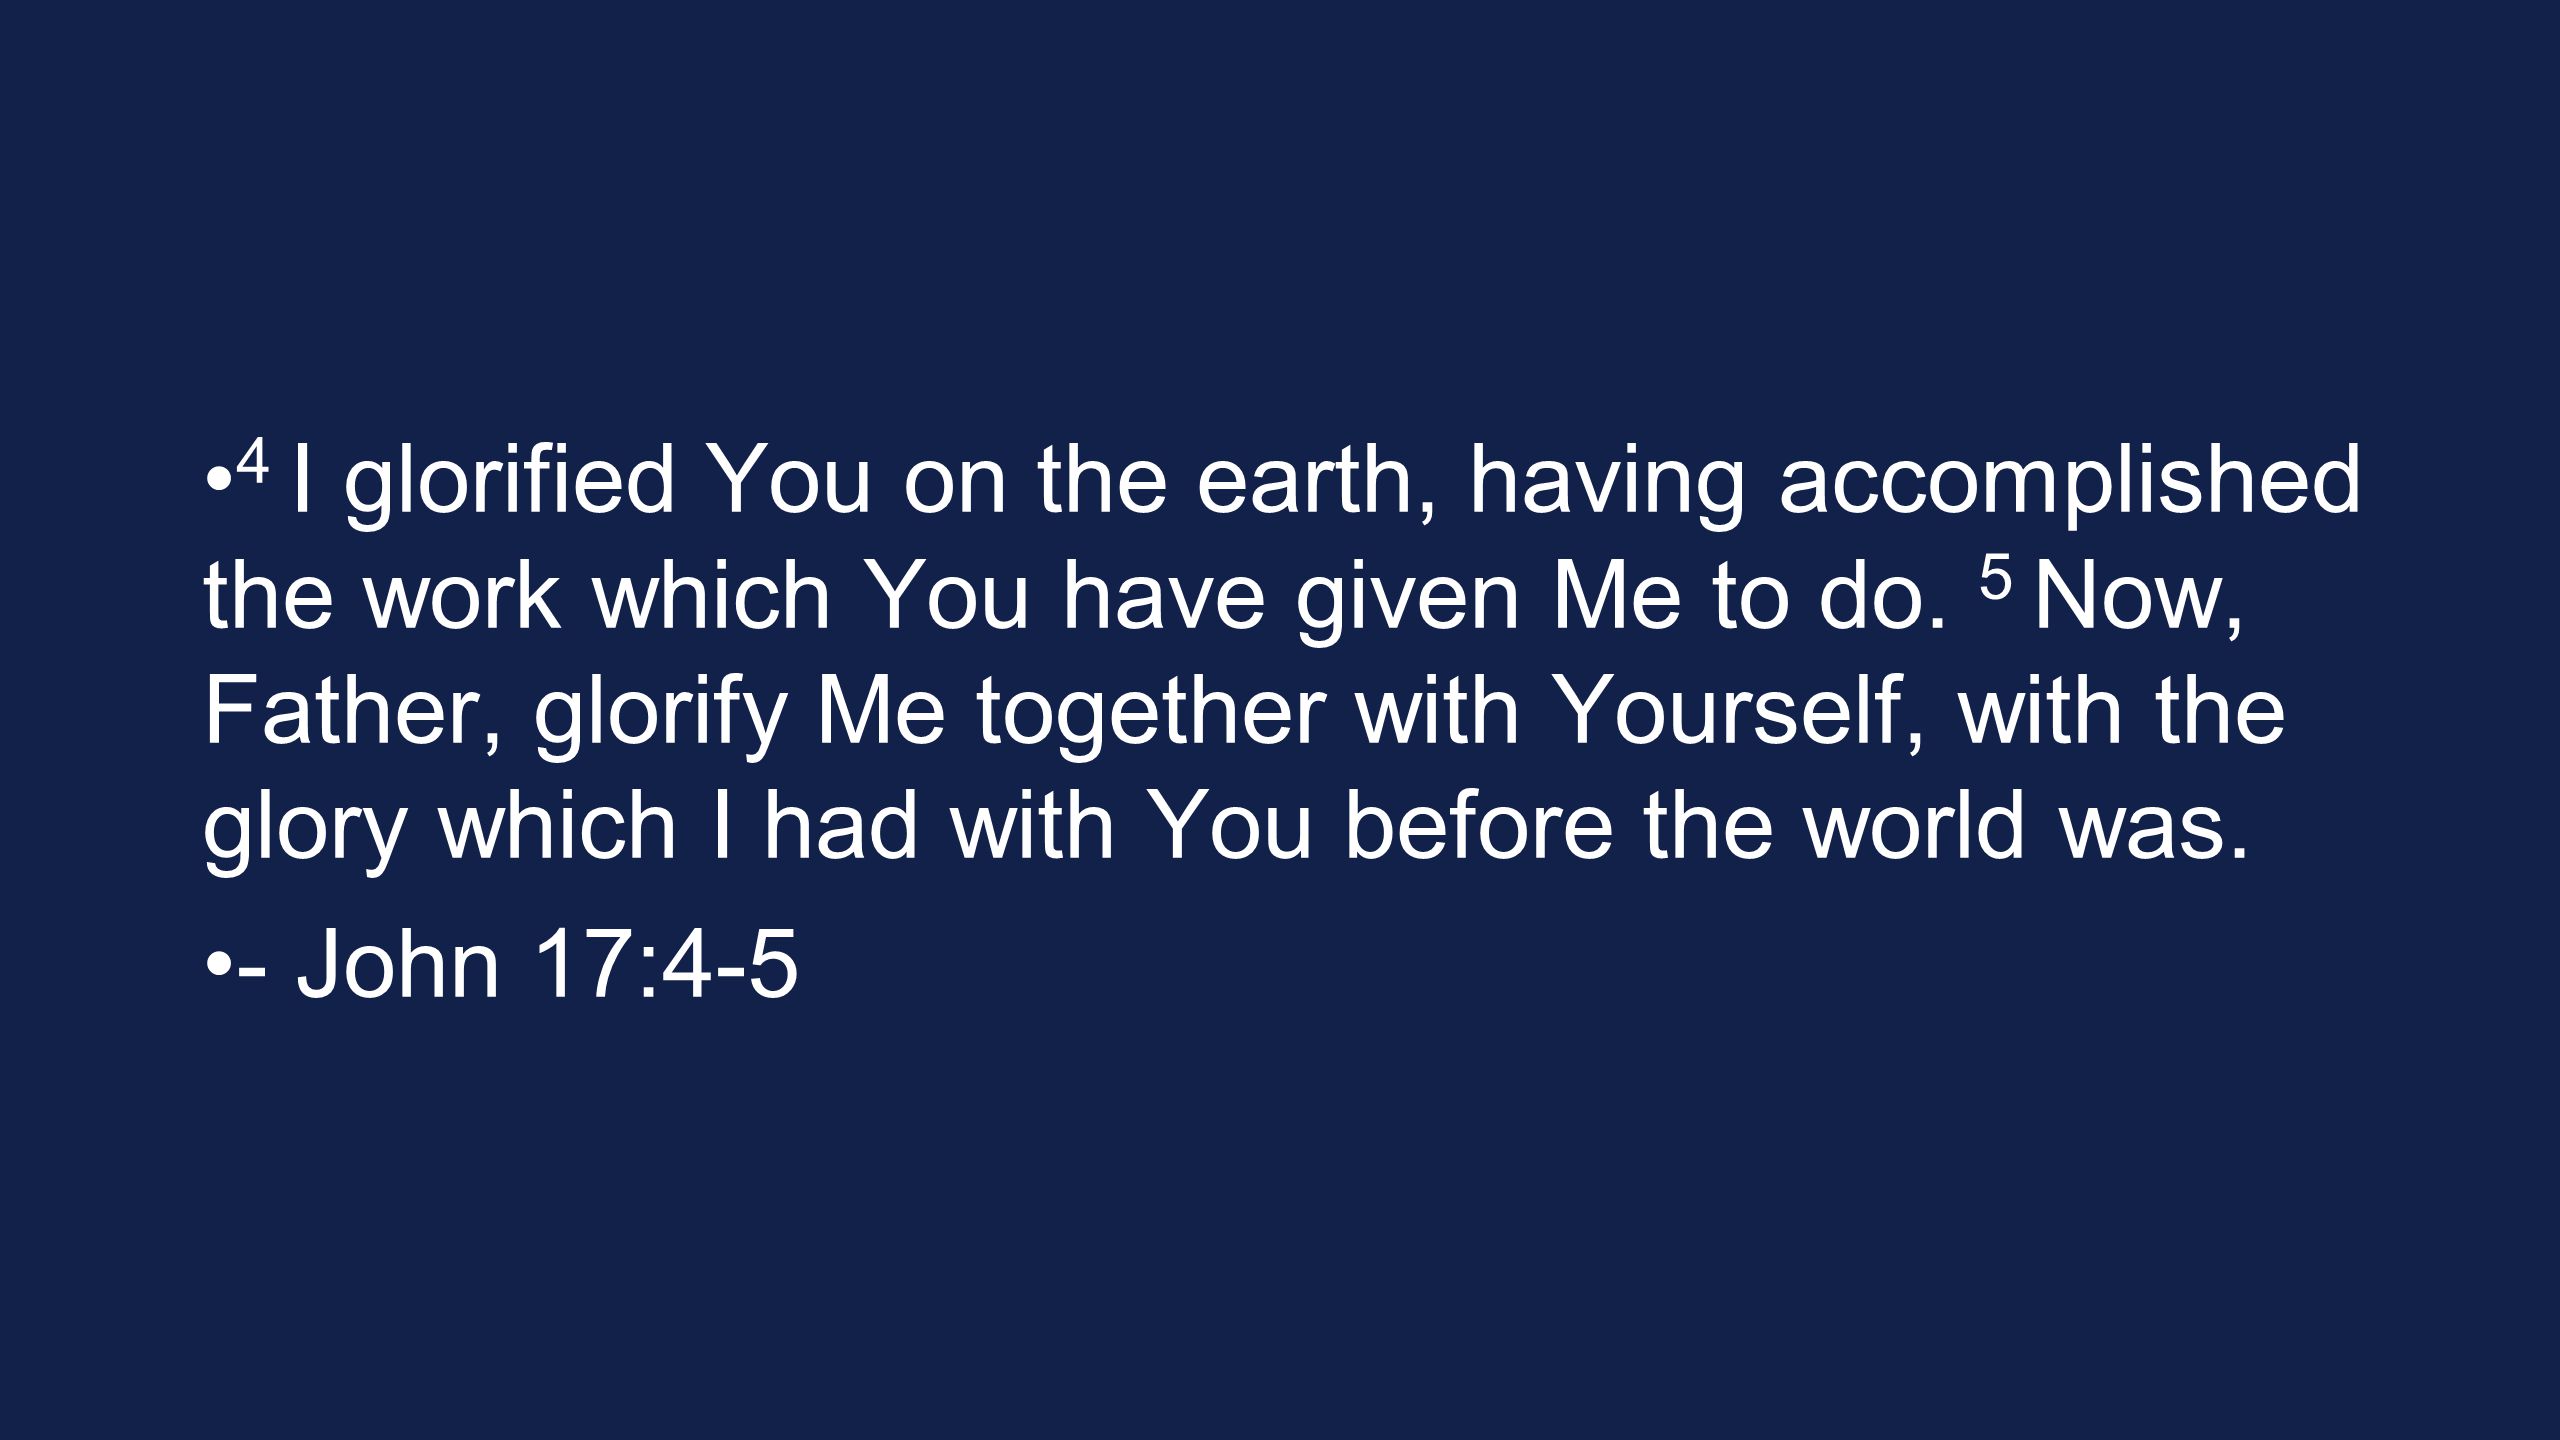 4 I glorified You on the earth, having accomplished the work which You have given Me to do. 5 Now, Father, glorify Me together with Yourself, with the glory which I had with You before the world was.